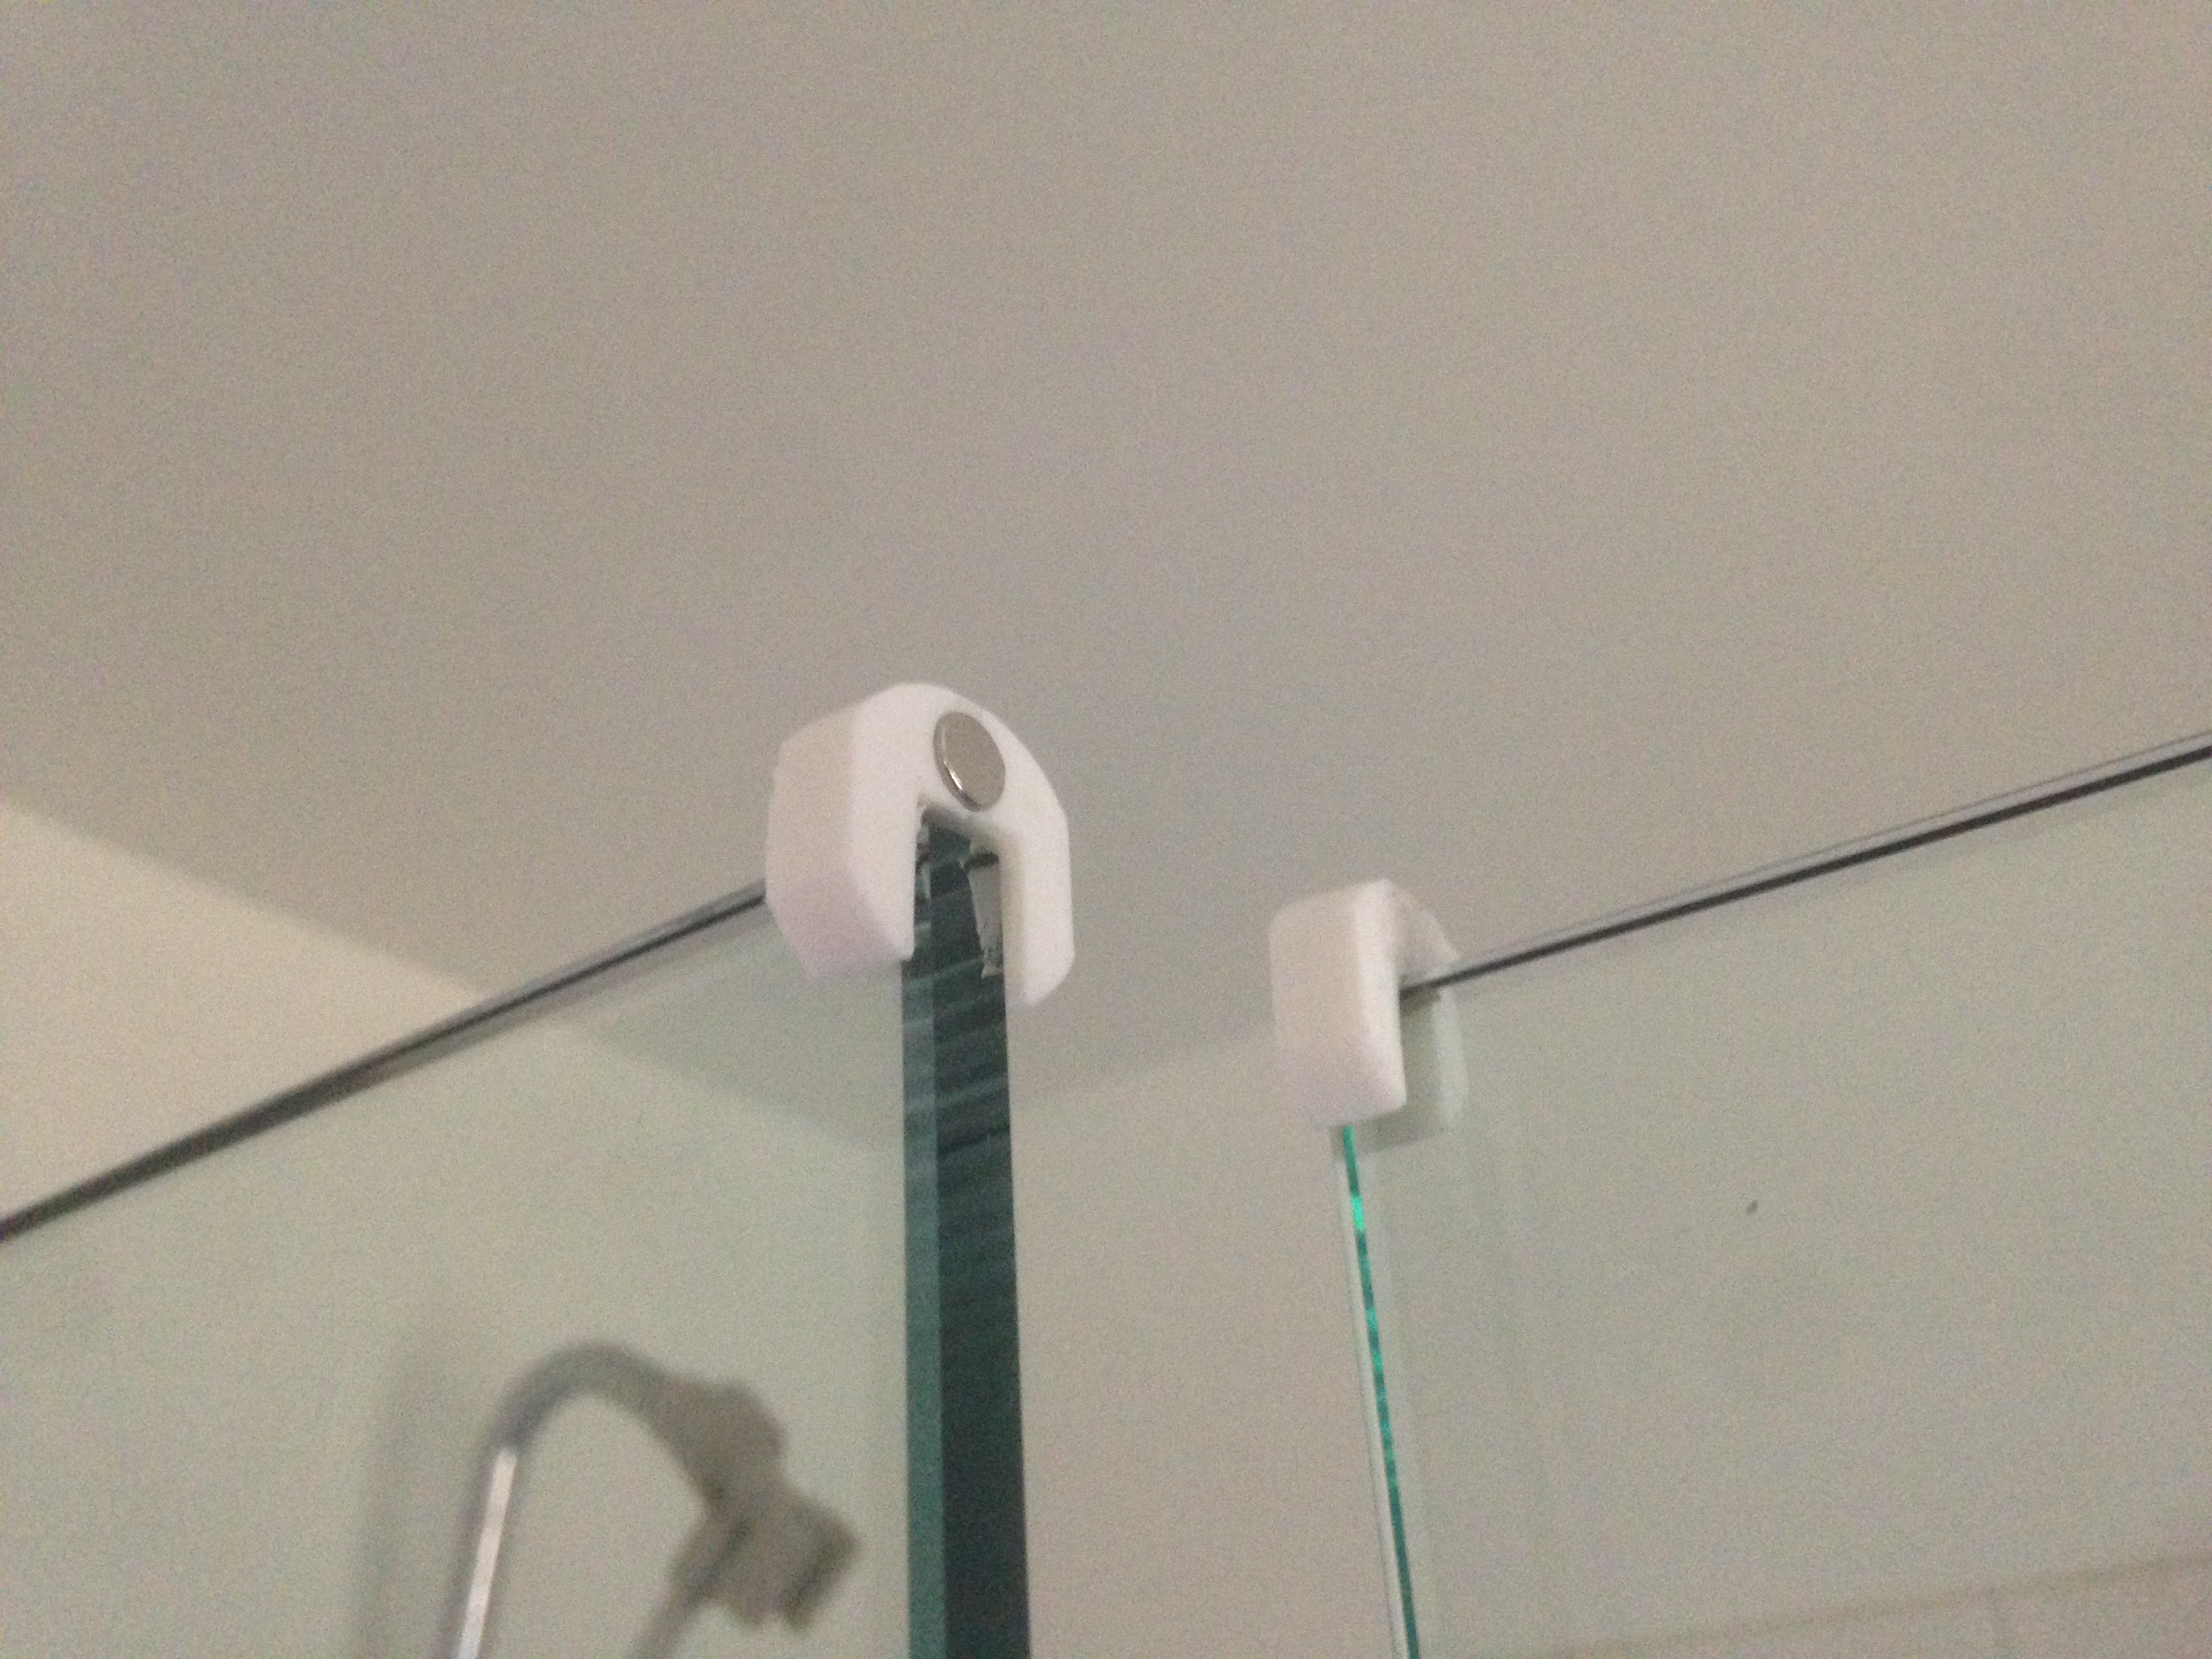 Glass Shower Door Magnet Brackets Stevecooley Thingiverse with regard to dimensions 3264 X 2448